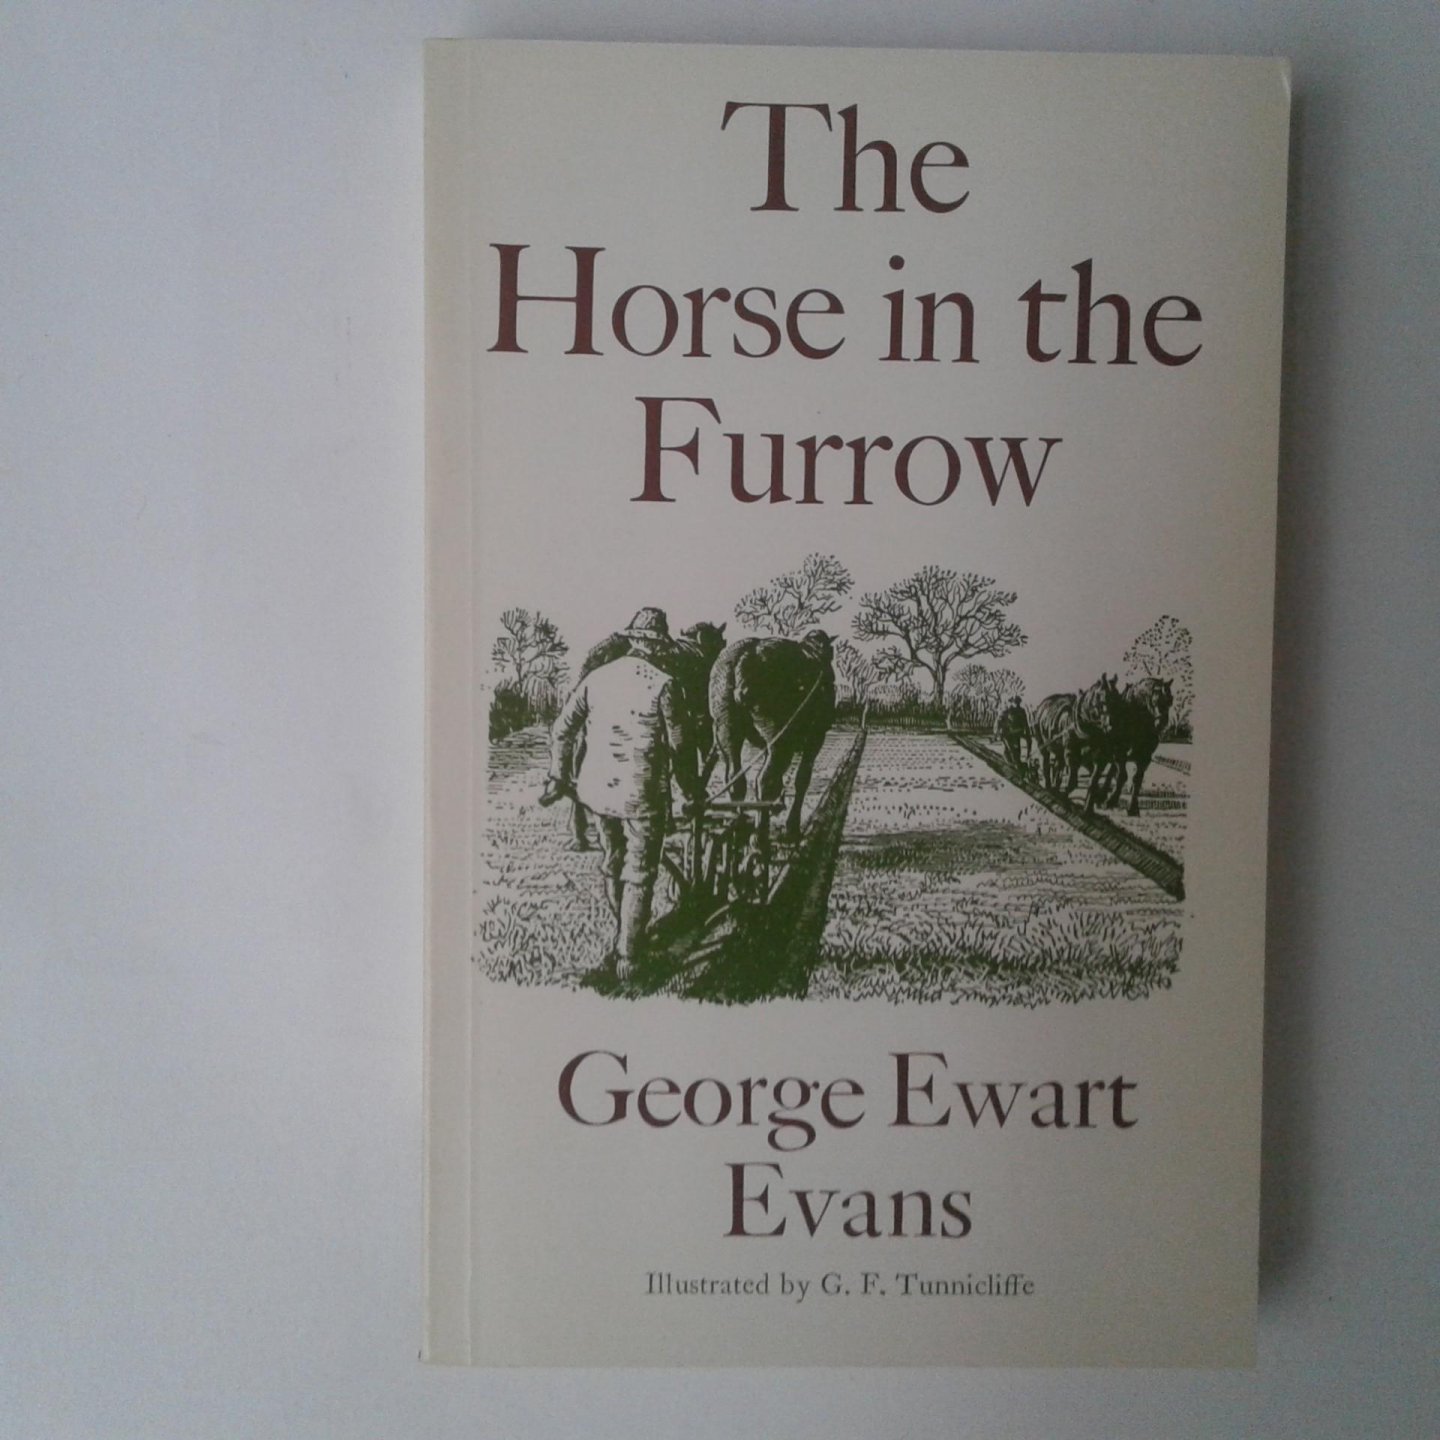 Evans, George Ewart - The Horse in the Furrow